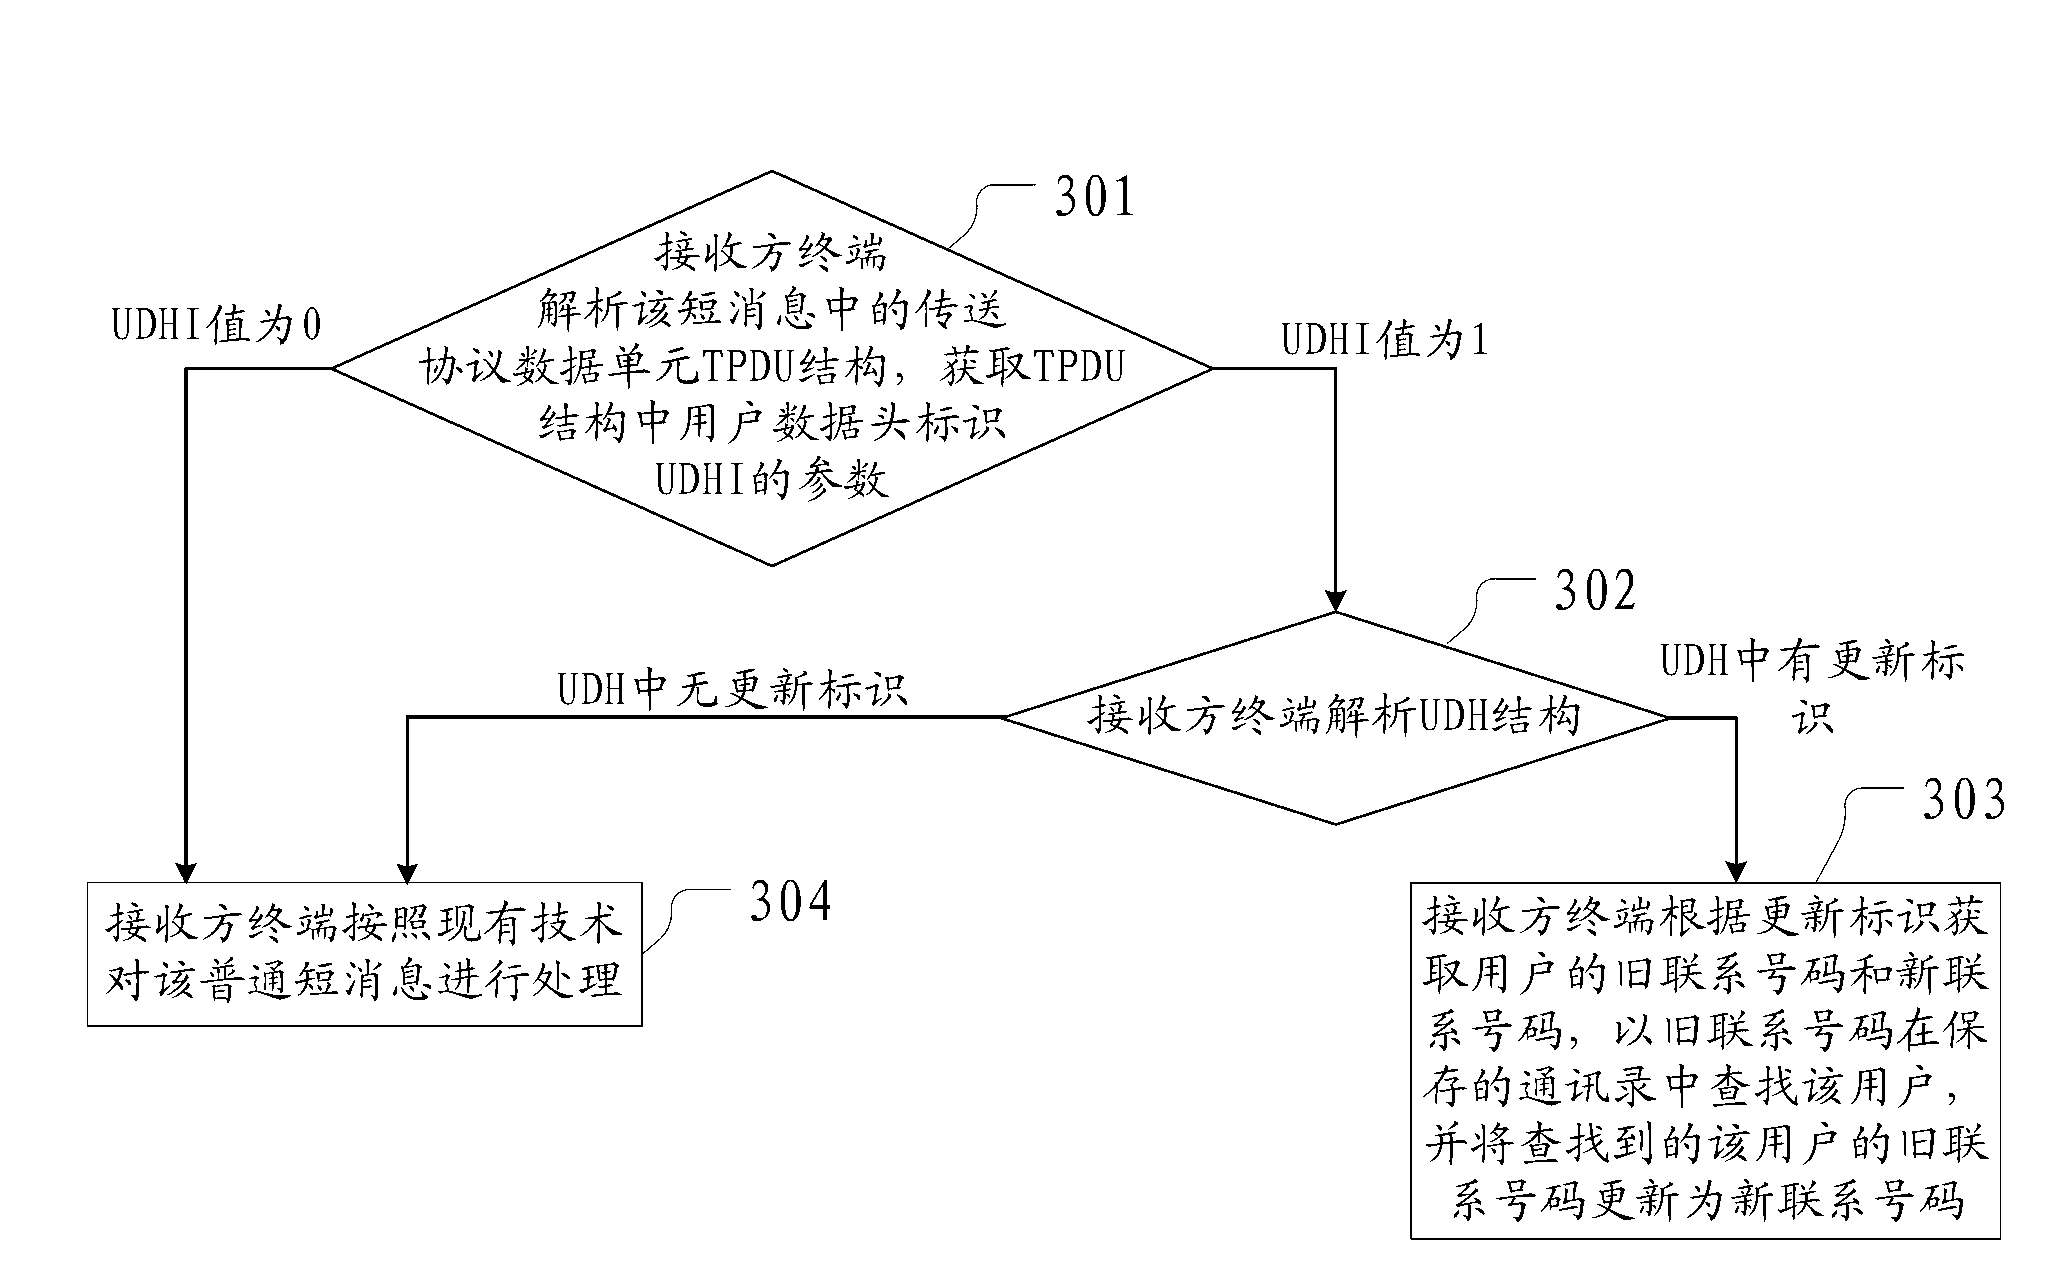 Method and device for updating contact numbers